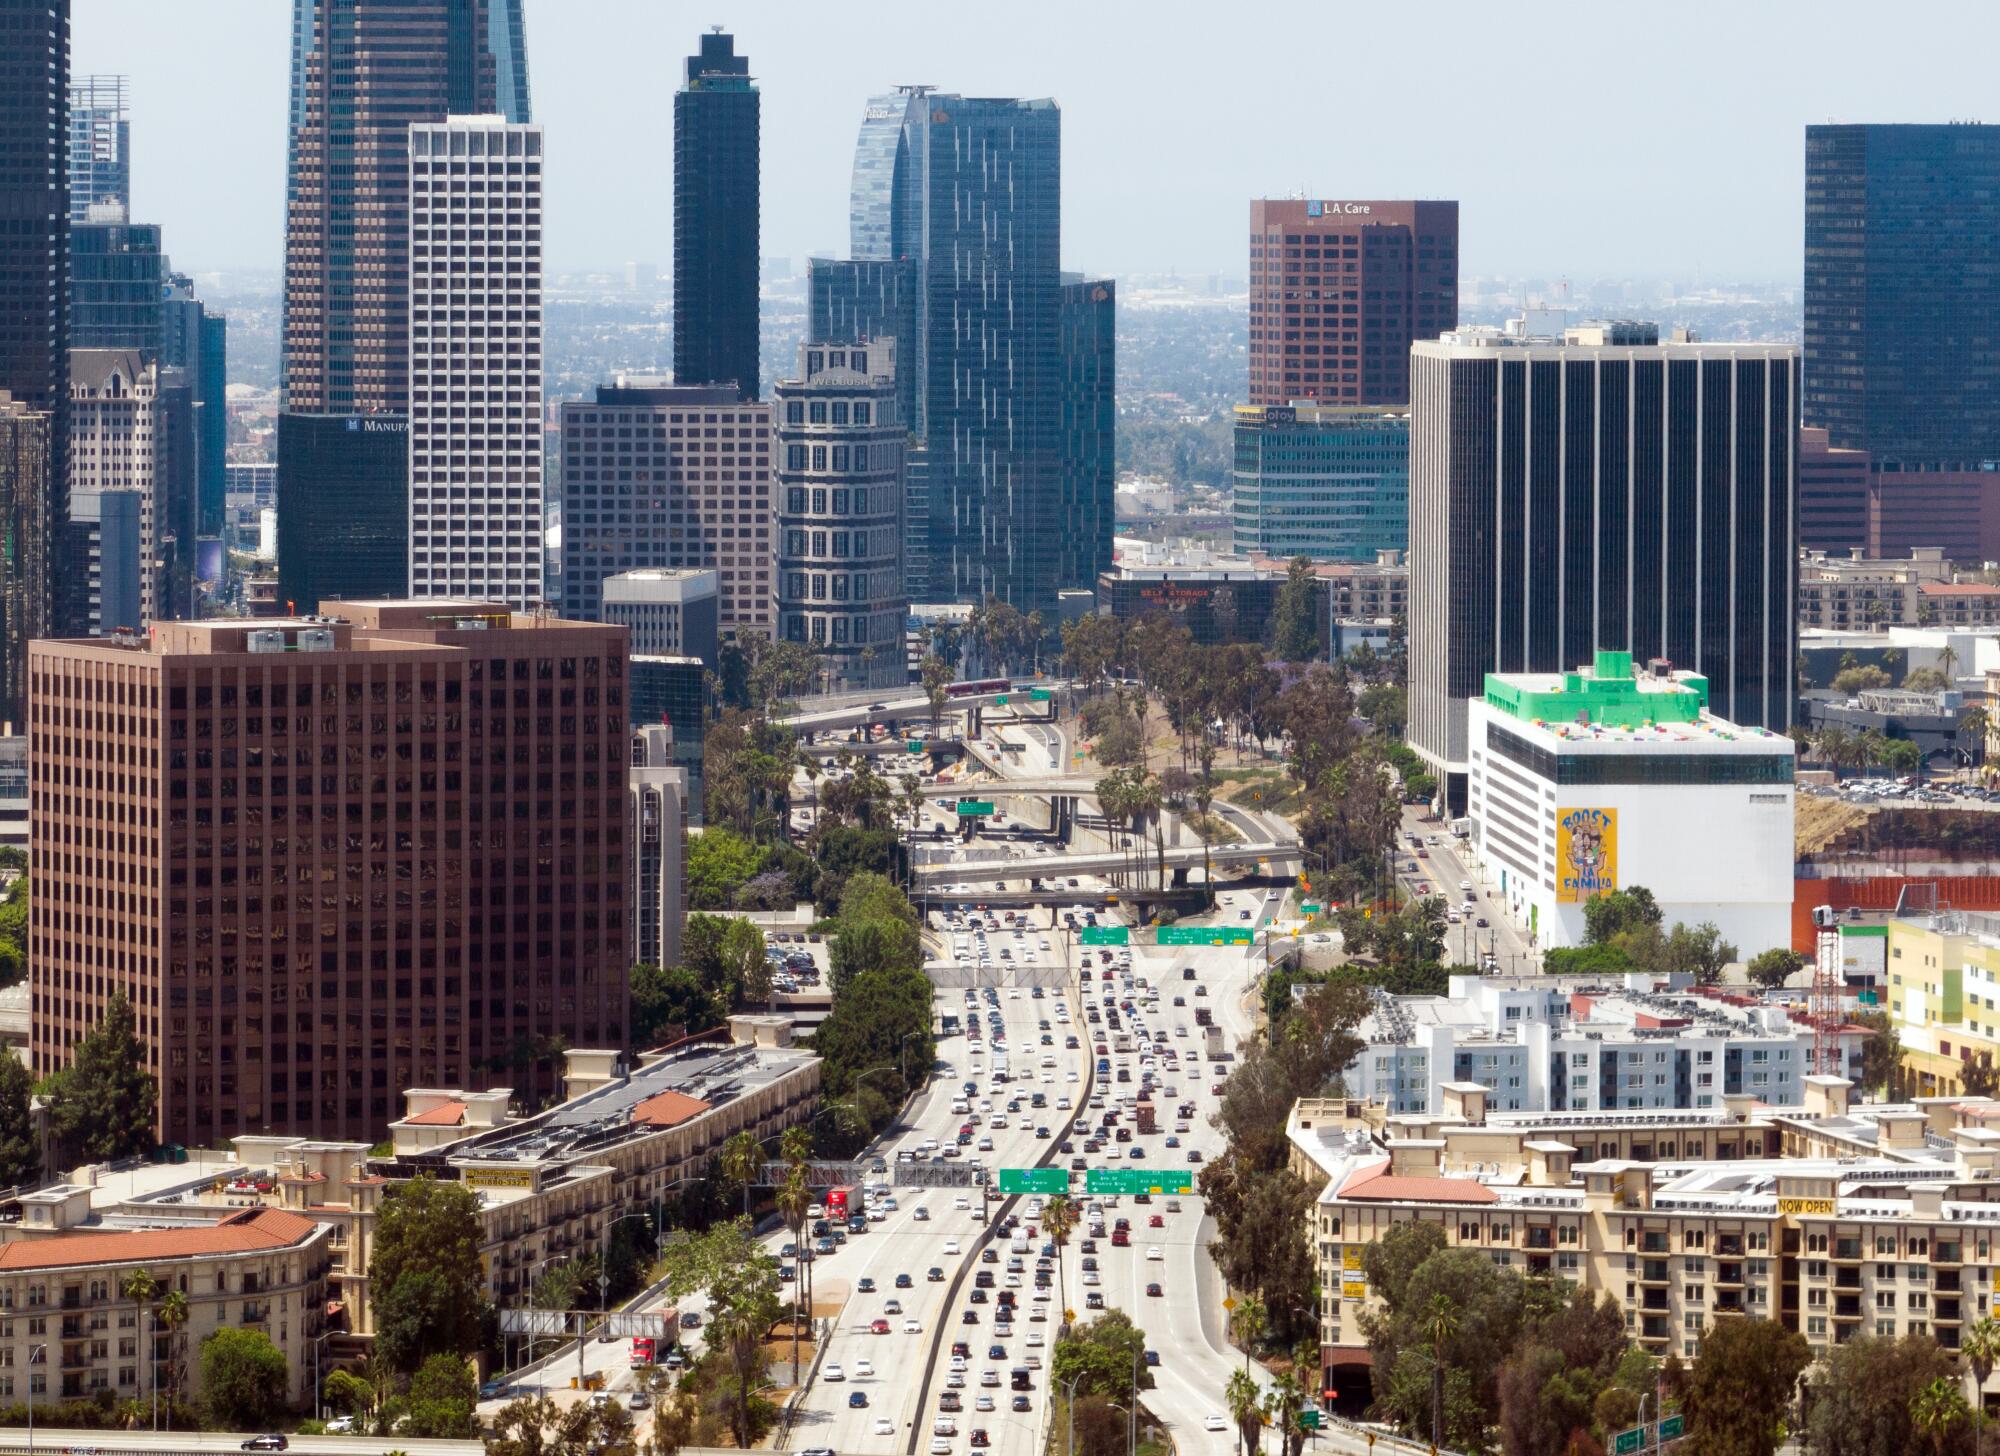 The 110 Freeway looking south through downtown Los Angeles.